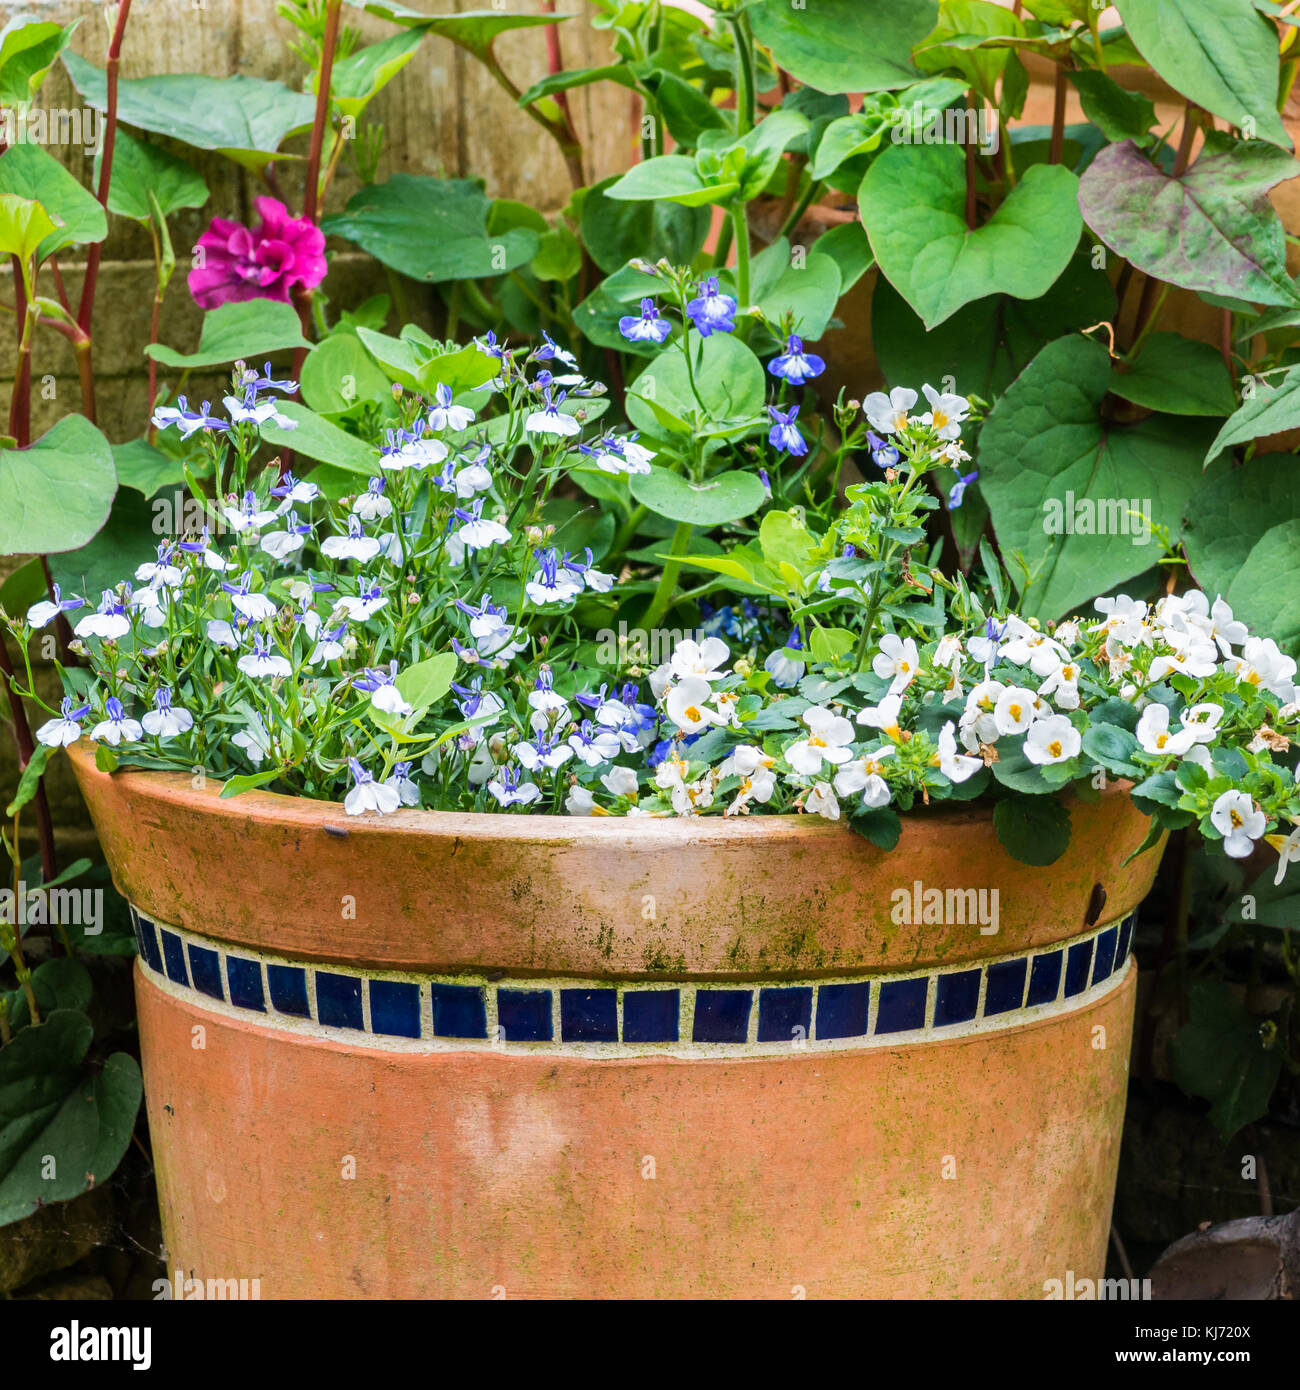 A shot of some blue and white flowers in a terracotta pot. Stock Photo